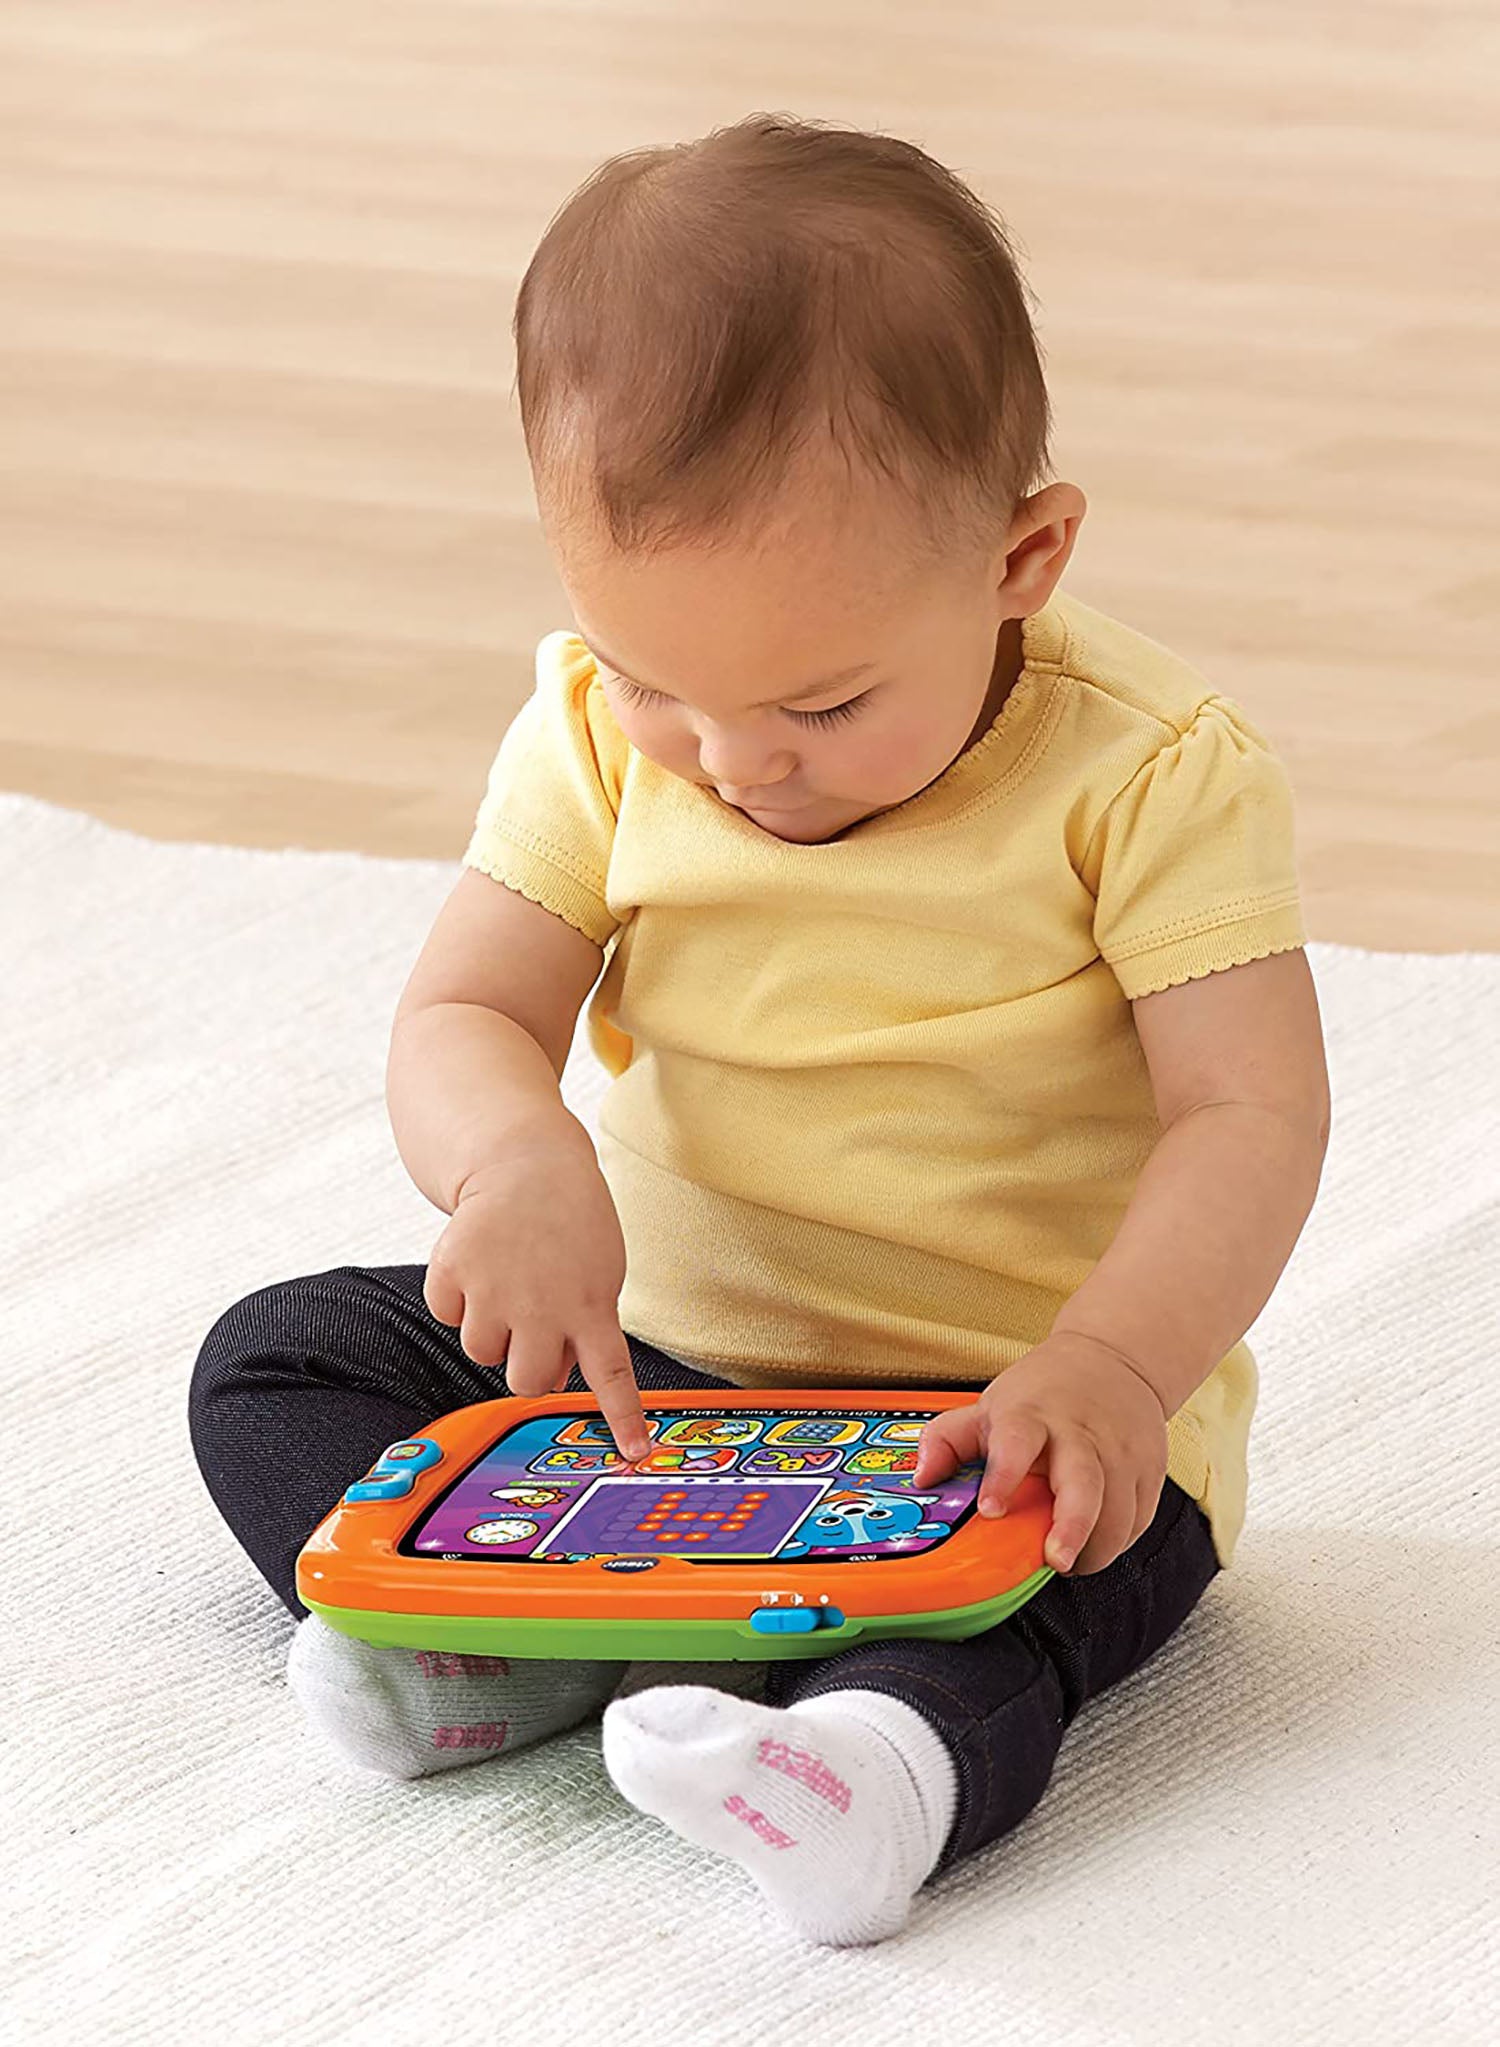 VTech Light-Up Baby Touch Tablet